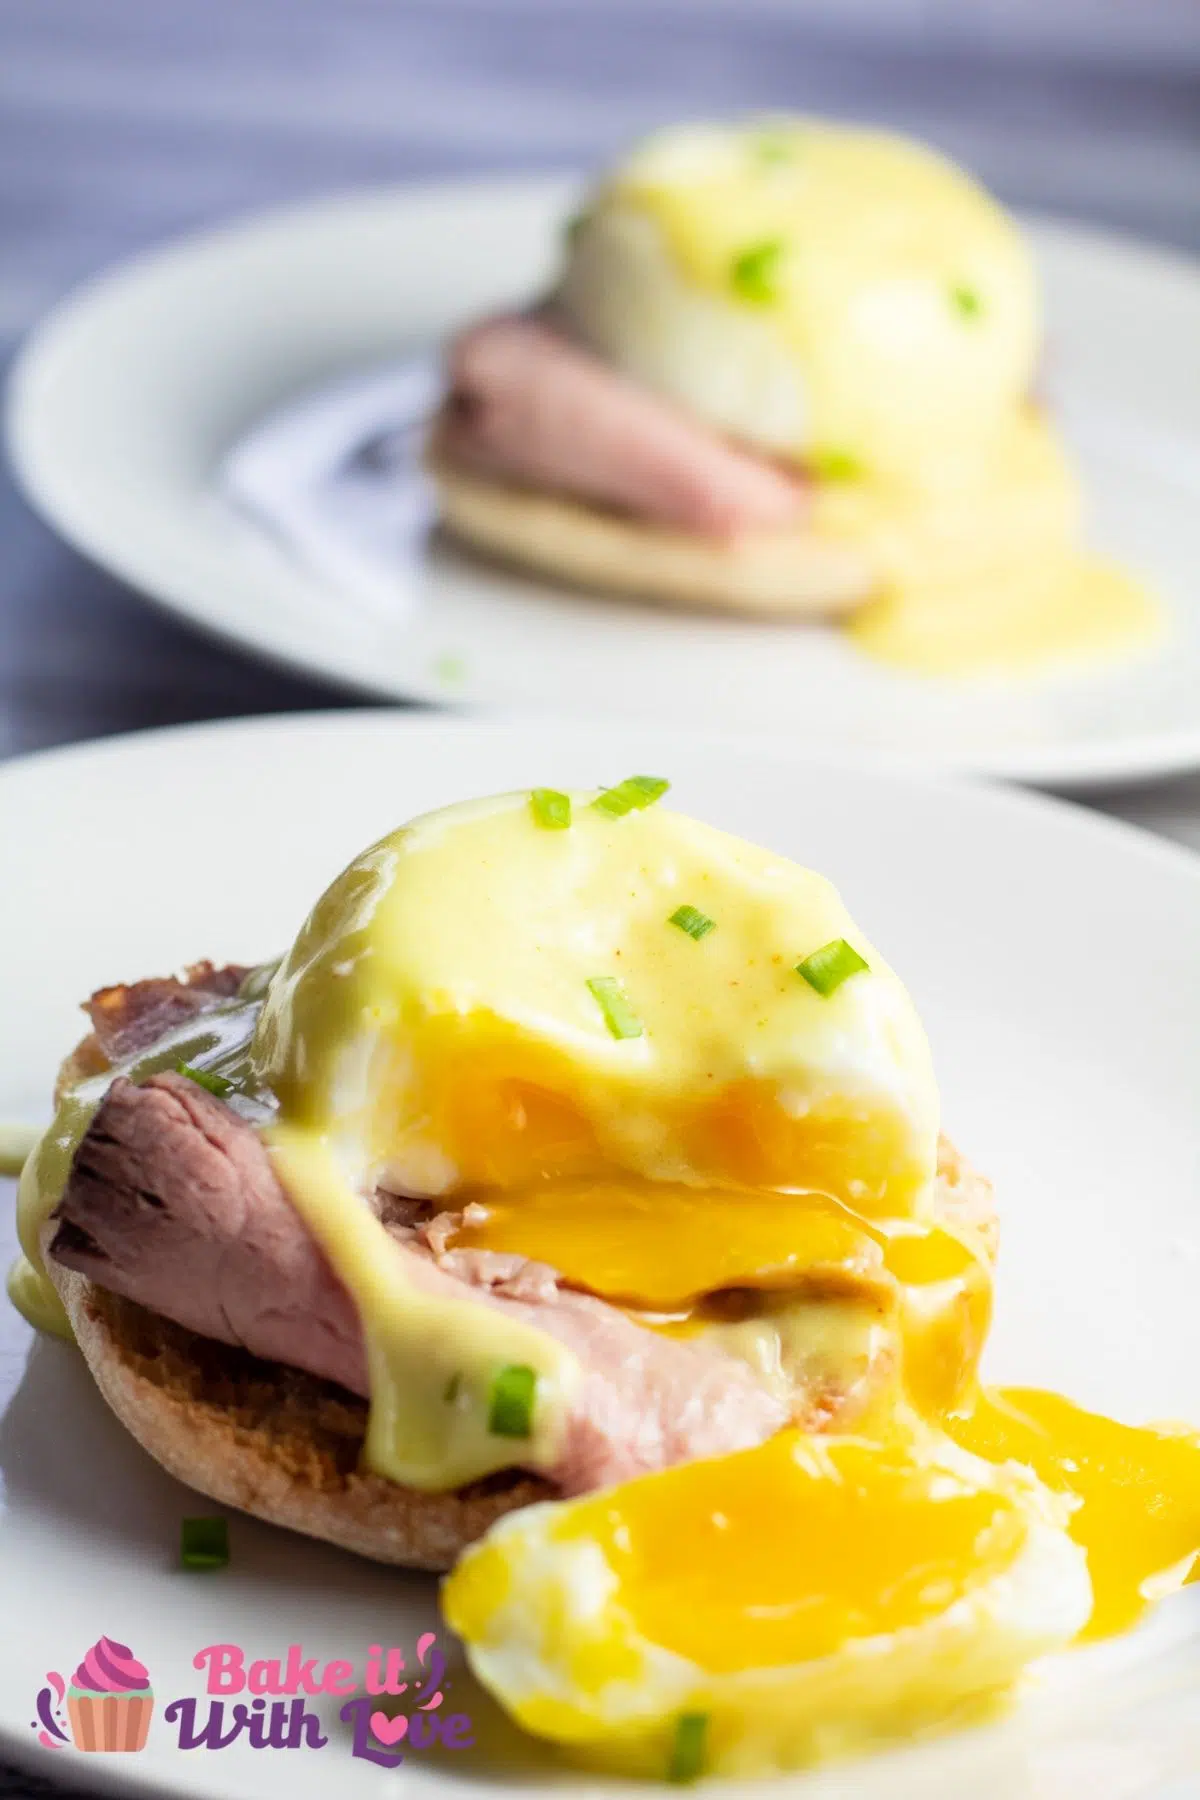 Incredibly tasty leftover prime rib eggs benedict breakfast served with the best hollandaise sauce and garnished with fresh chives.